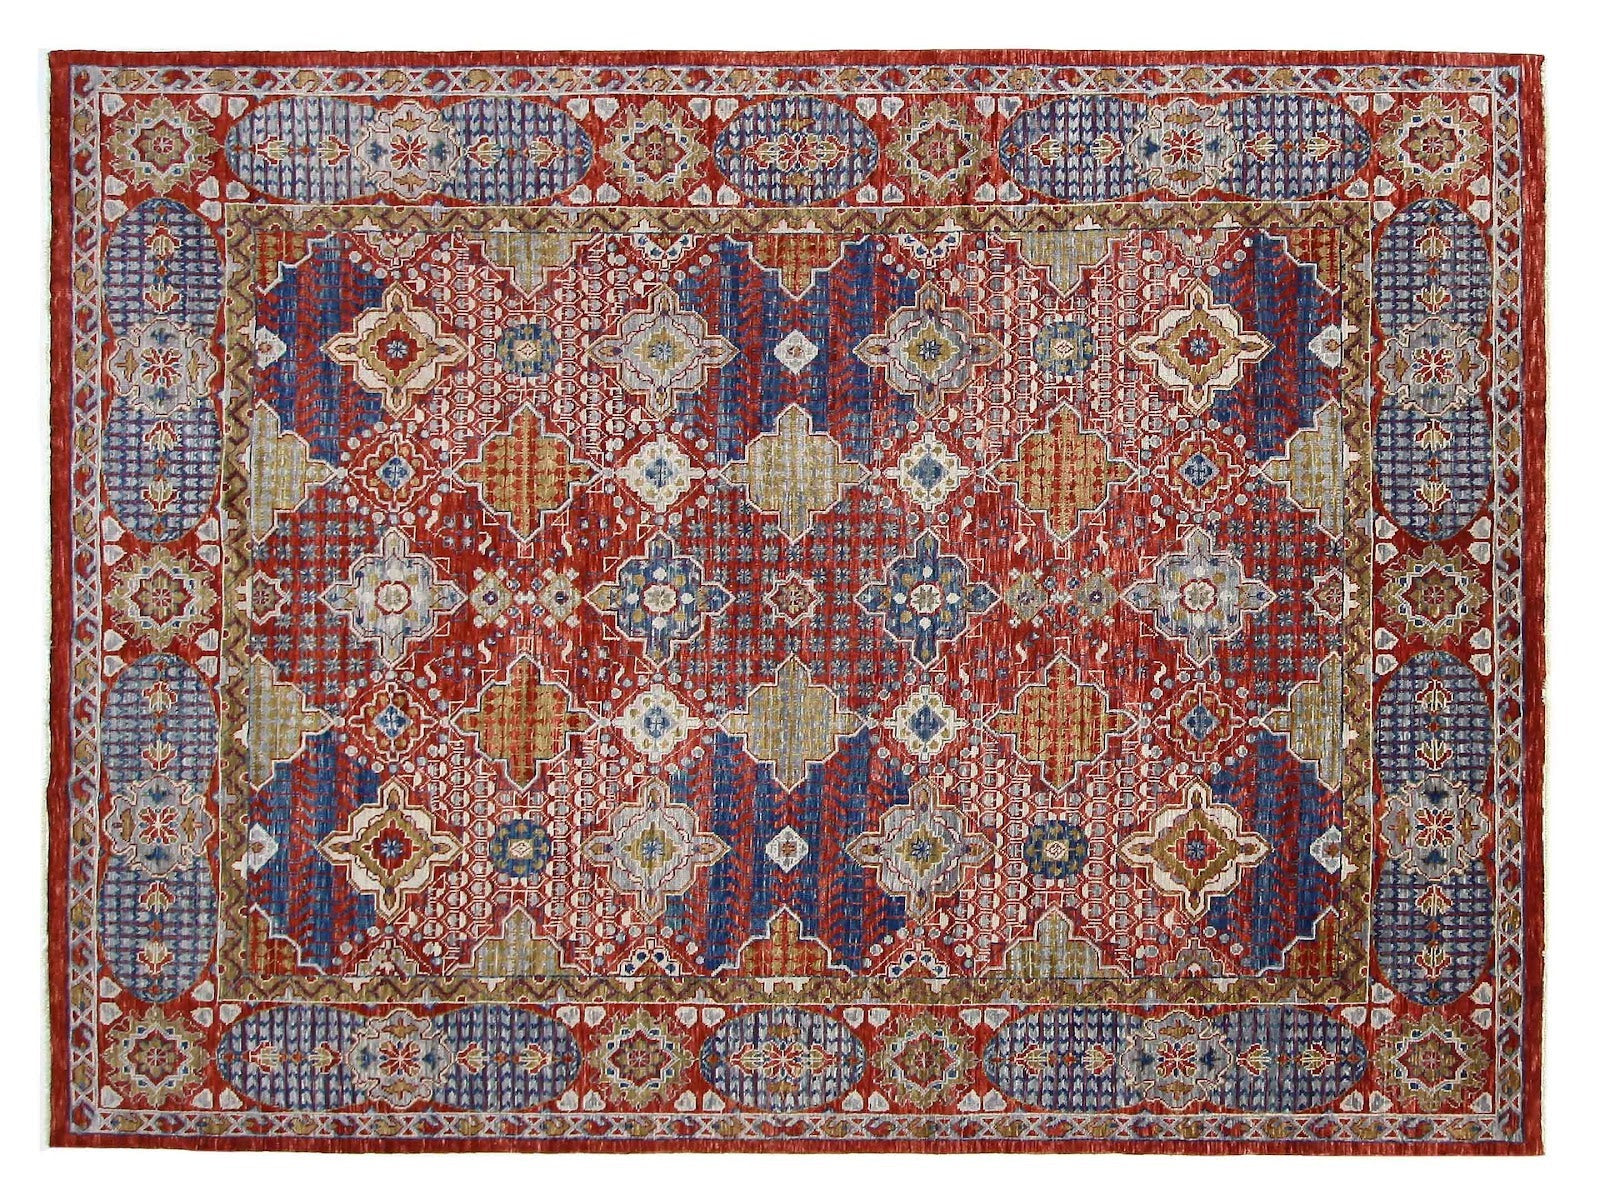 12x15 hand-knotted Anatolian tribal rug, rich in red with a navy border and unique tribal patterns